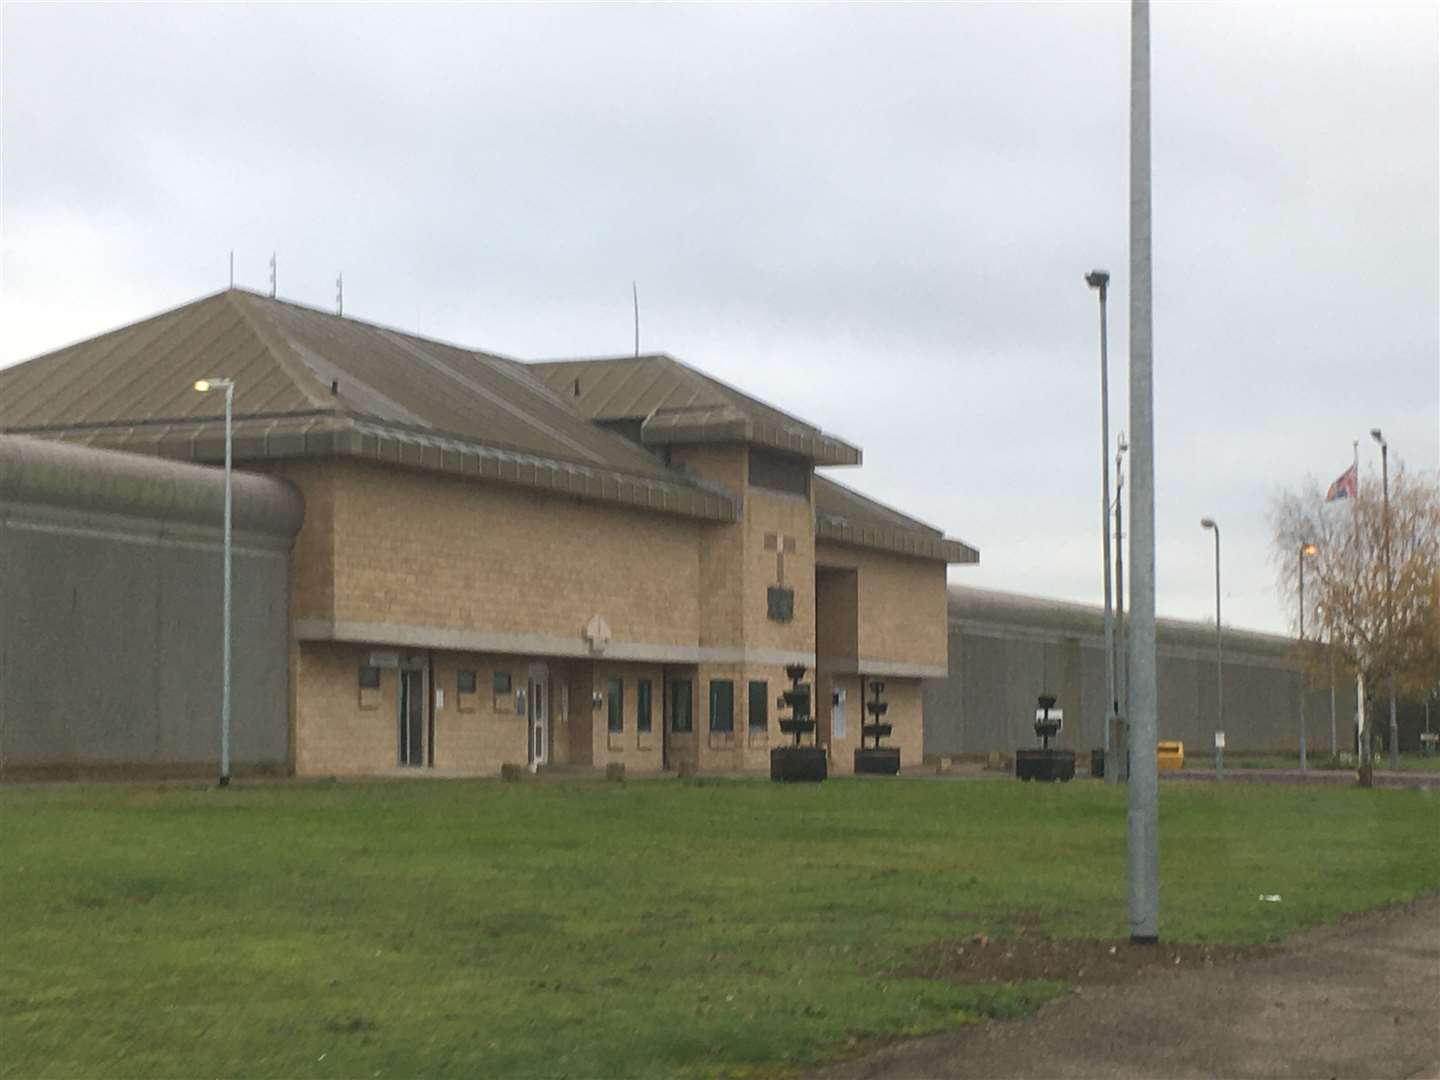 HMP Elmley Prison at Eastchurch on the Isle of Sheppey